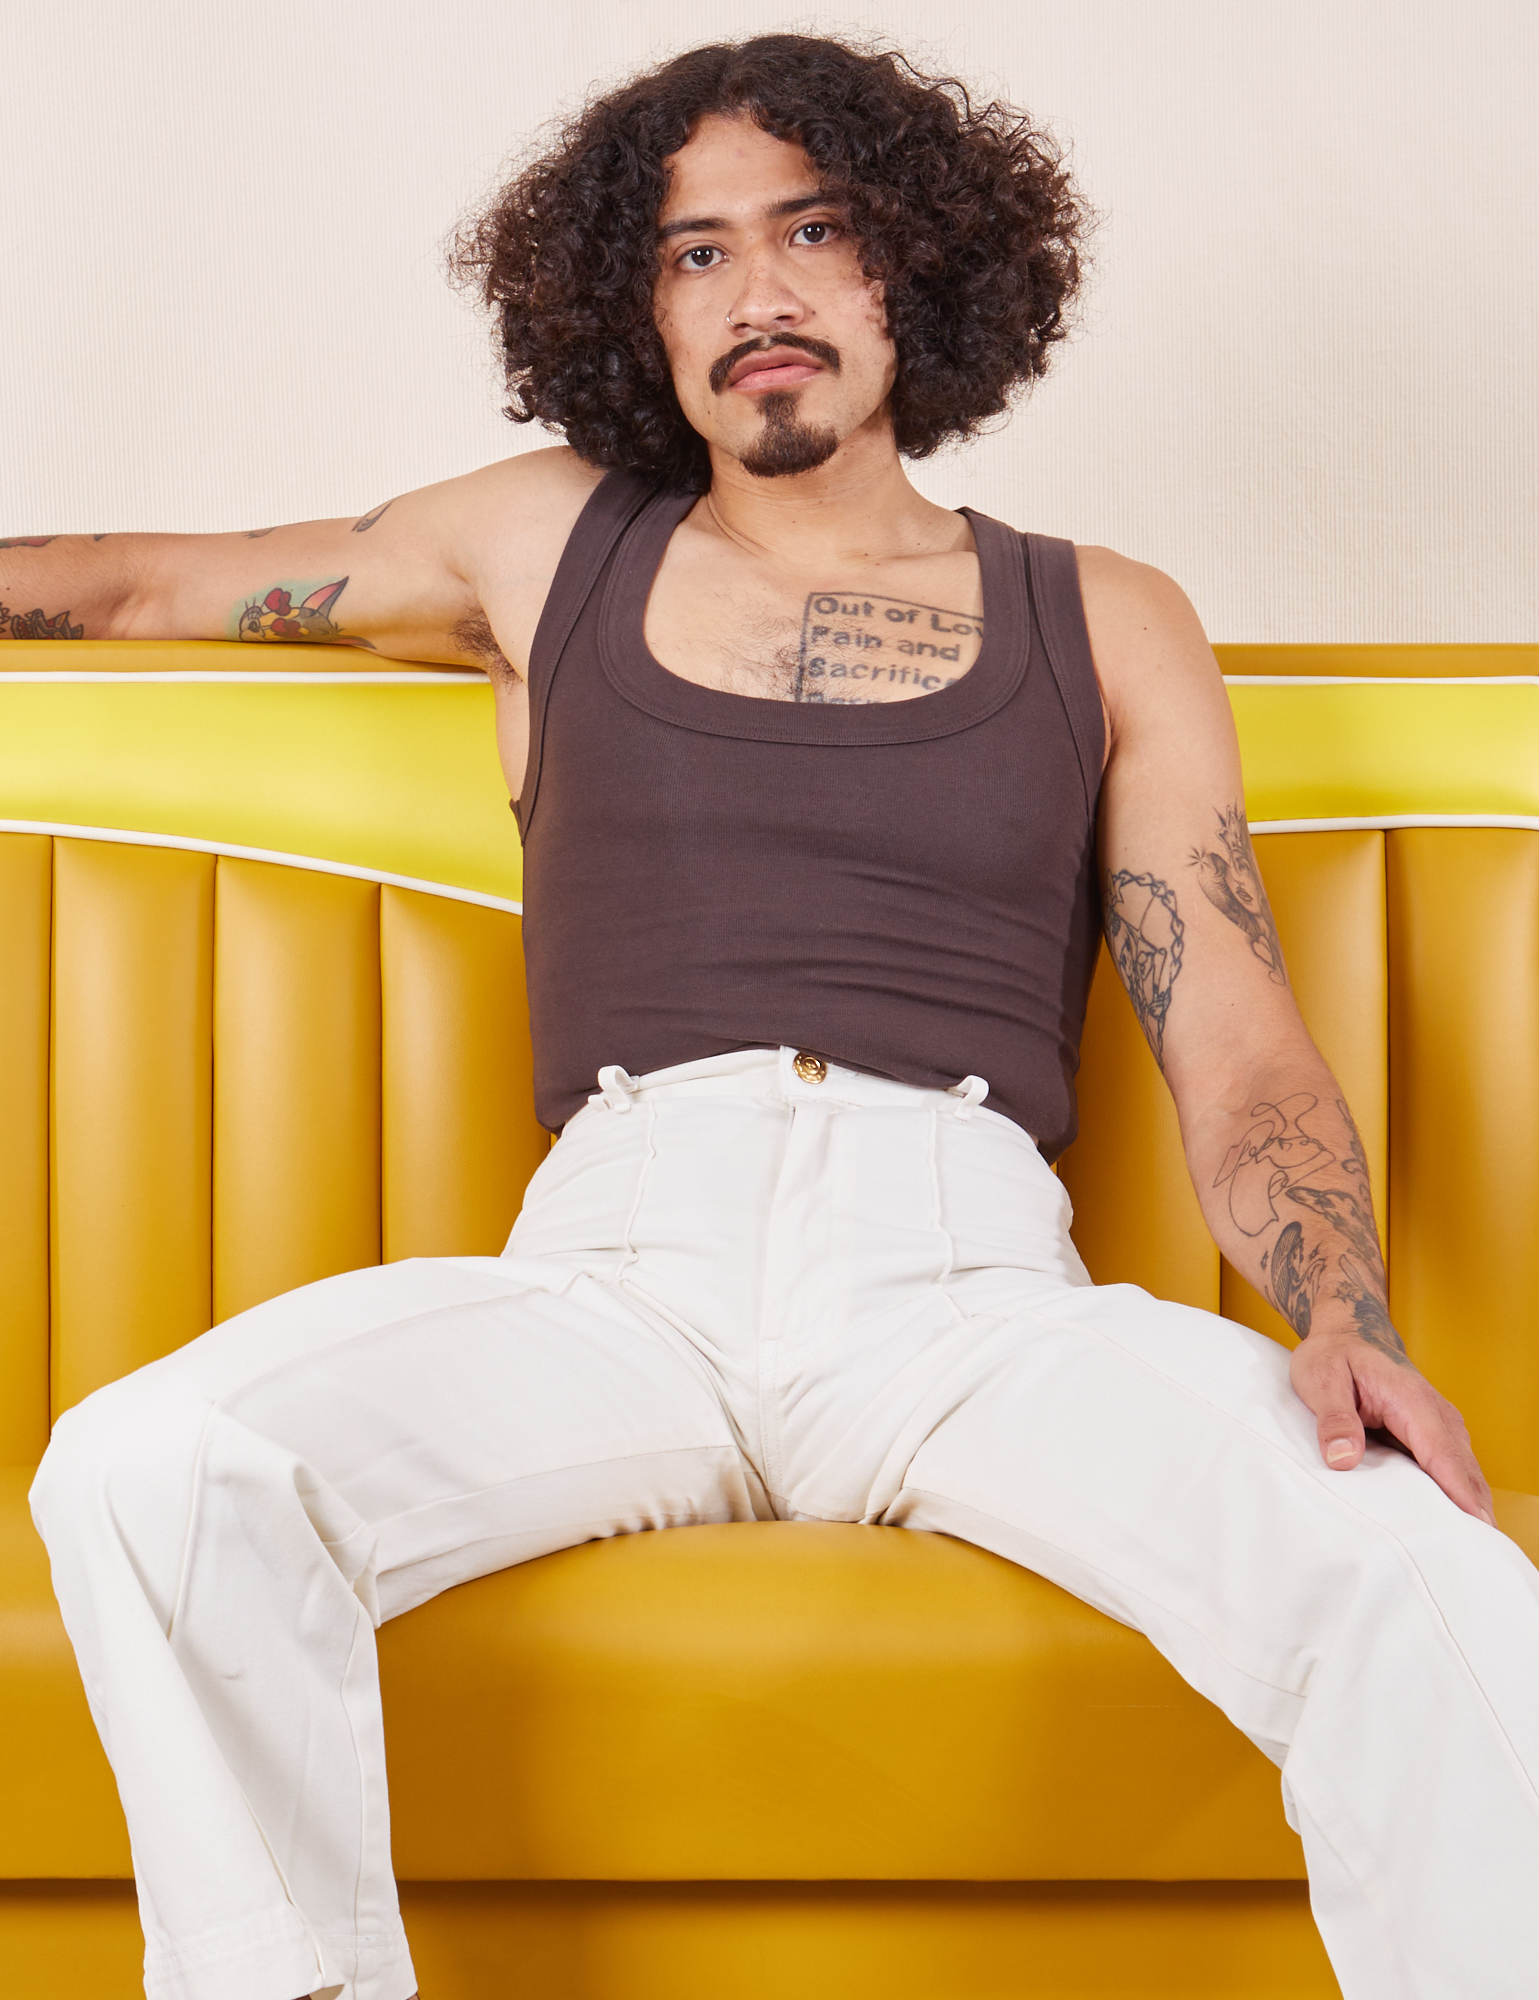 Jesse is wearing Western Pants in Vintage Tee Off-White and espresso brown Tank Top. They are sitting in a vinyl yellow dining booth.